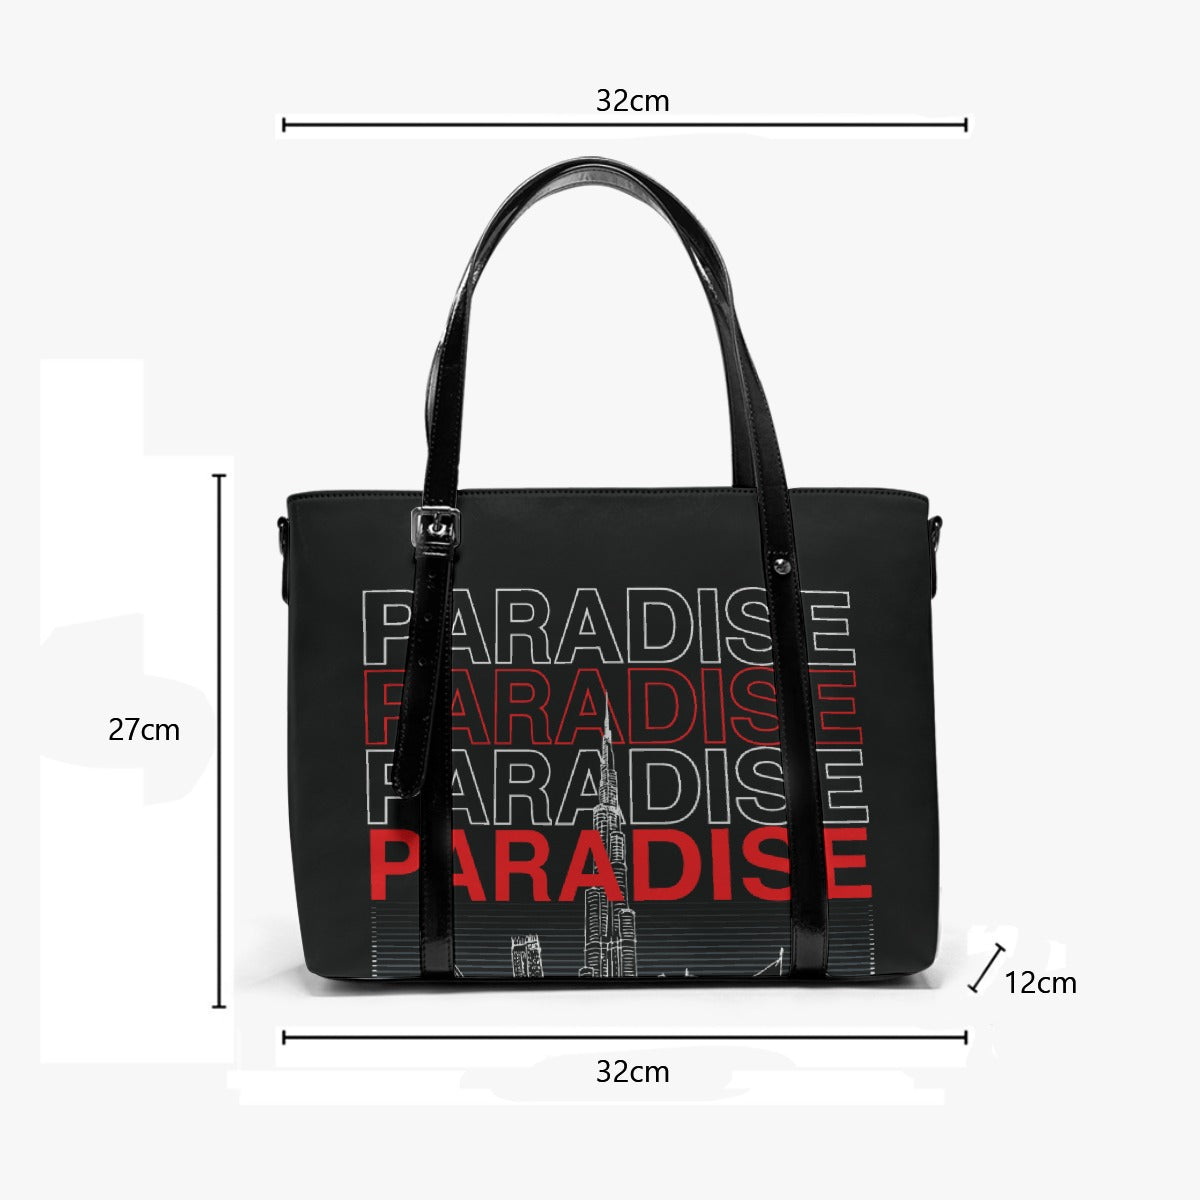 Black & Red Paradise Women's Tote Bag With Adjustable Handle, Large Travel Bag, Duffel